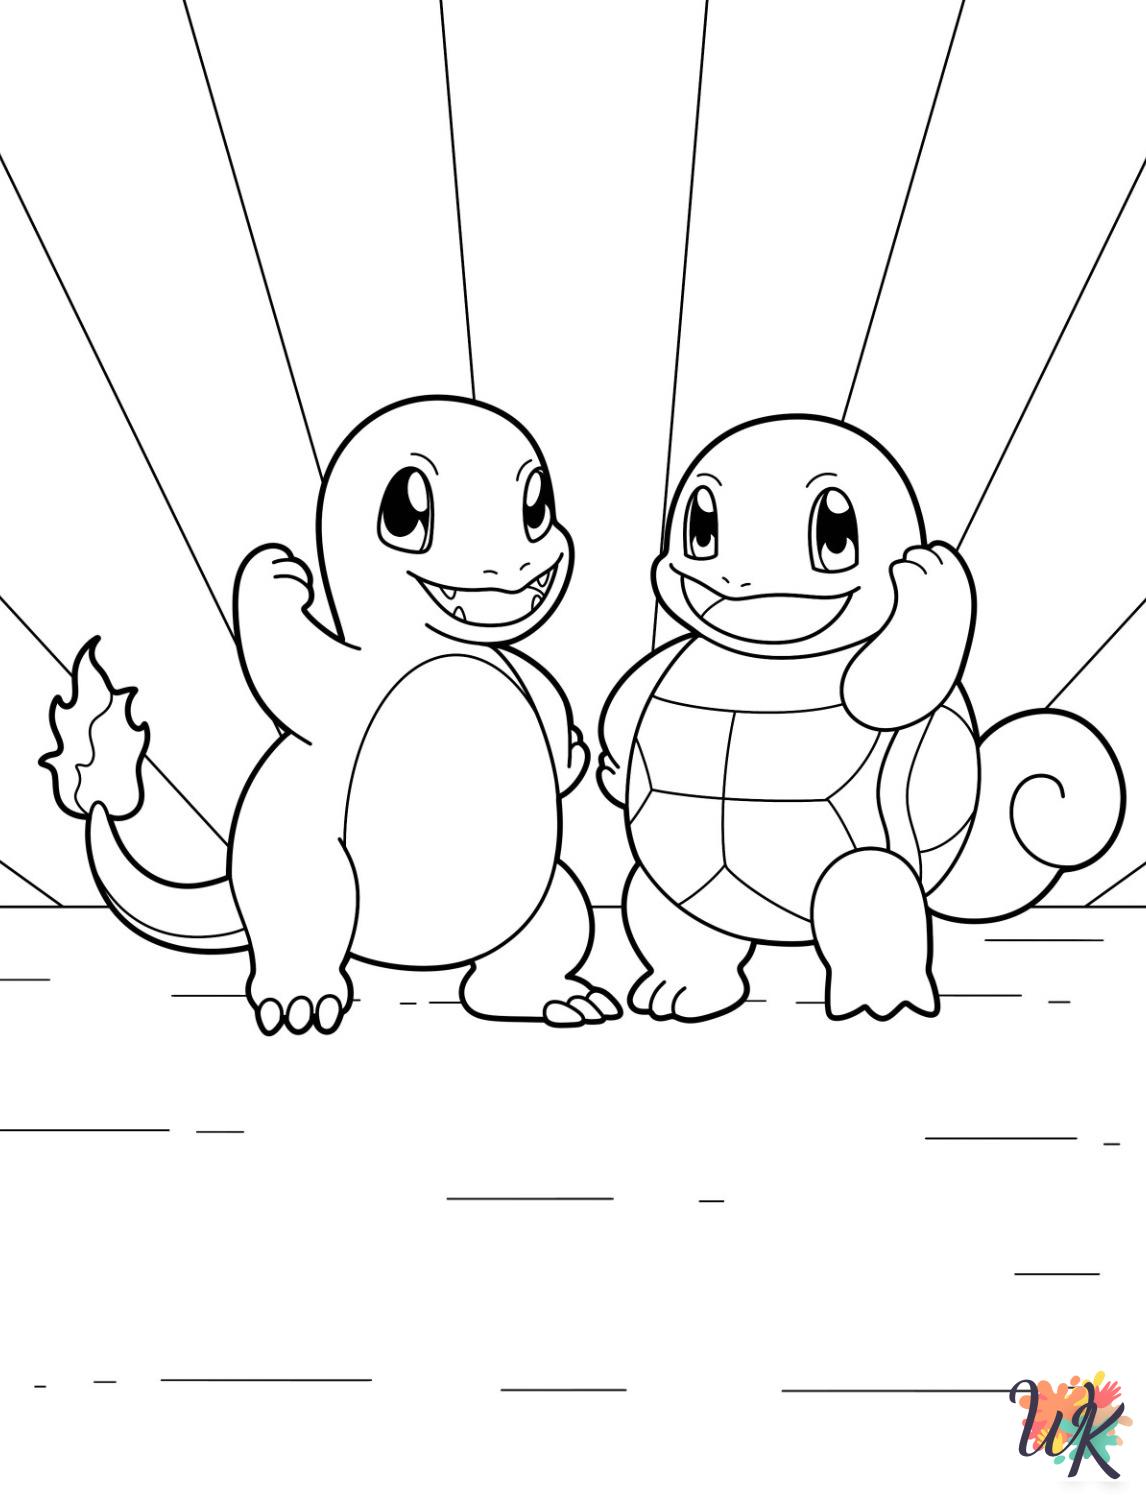 Charmander coloring pages for adults pdf